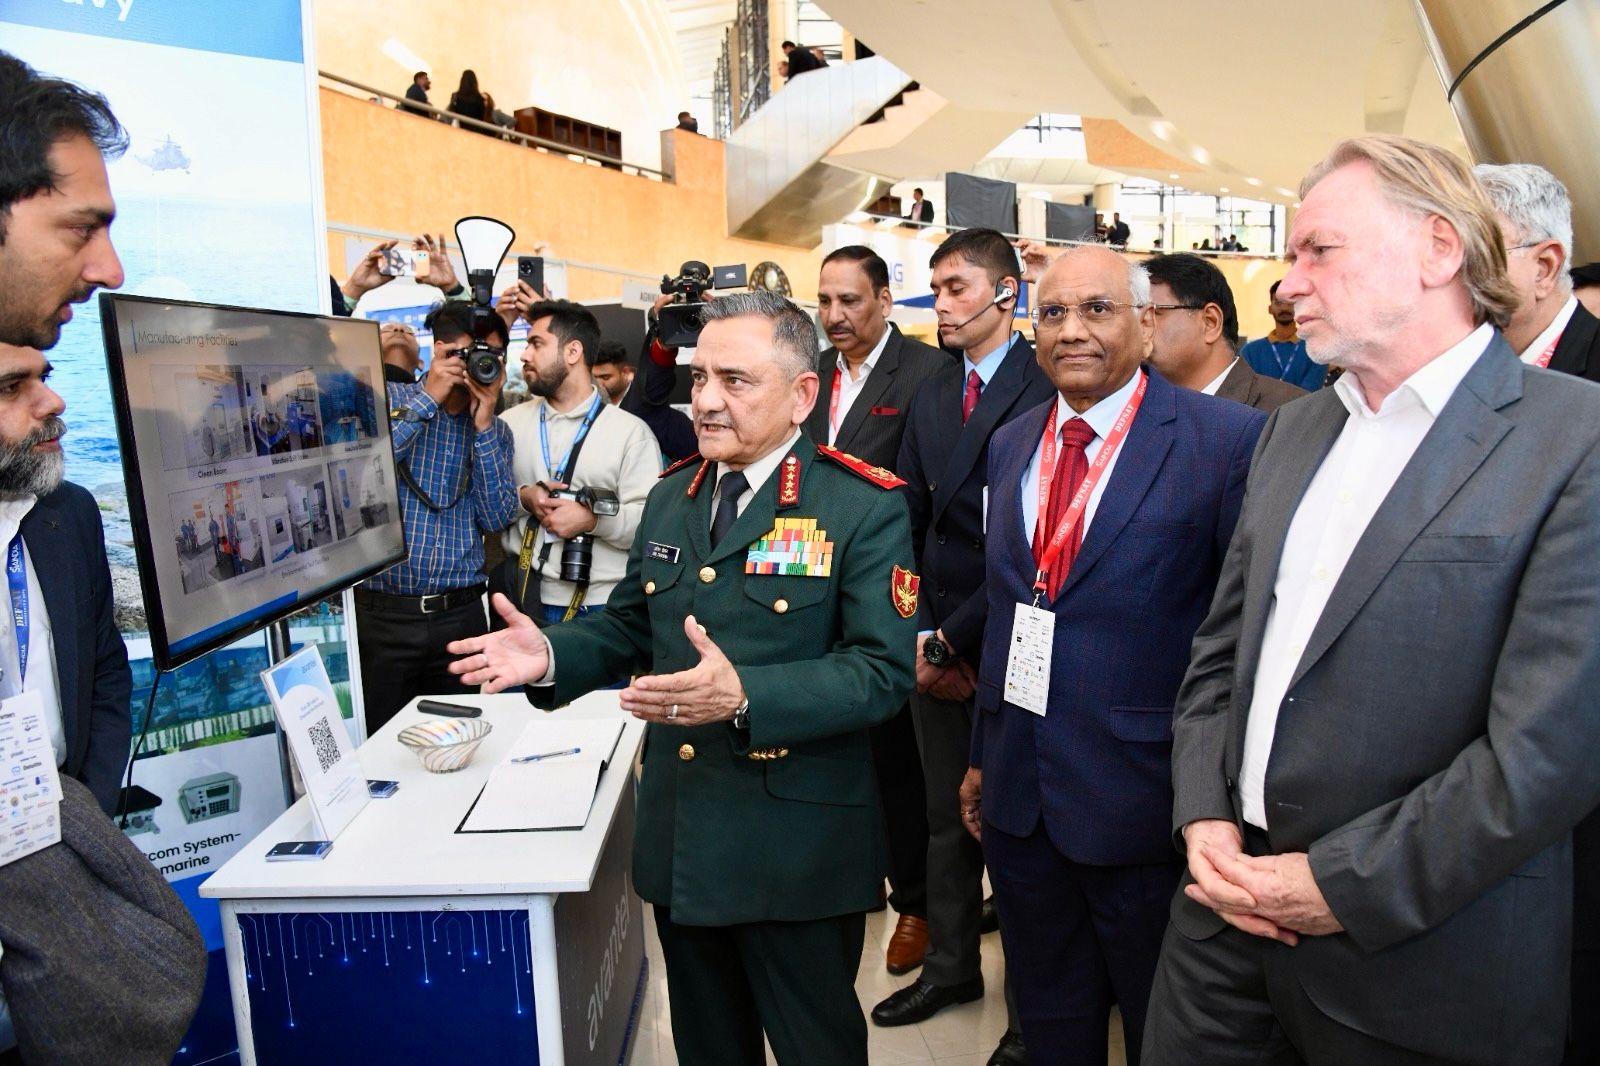 CDS Urges Industry To Work On Counter-Space Capabilities For National Security